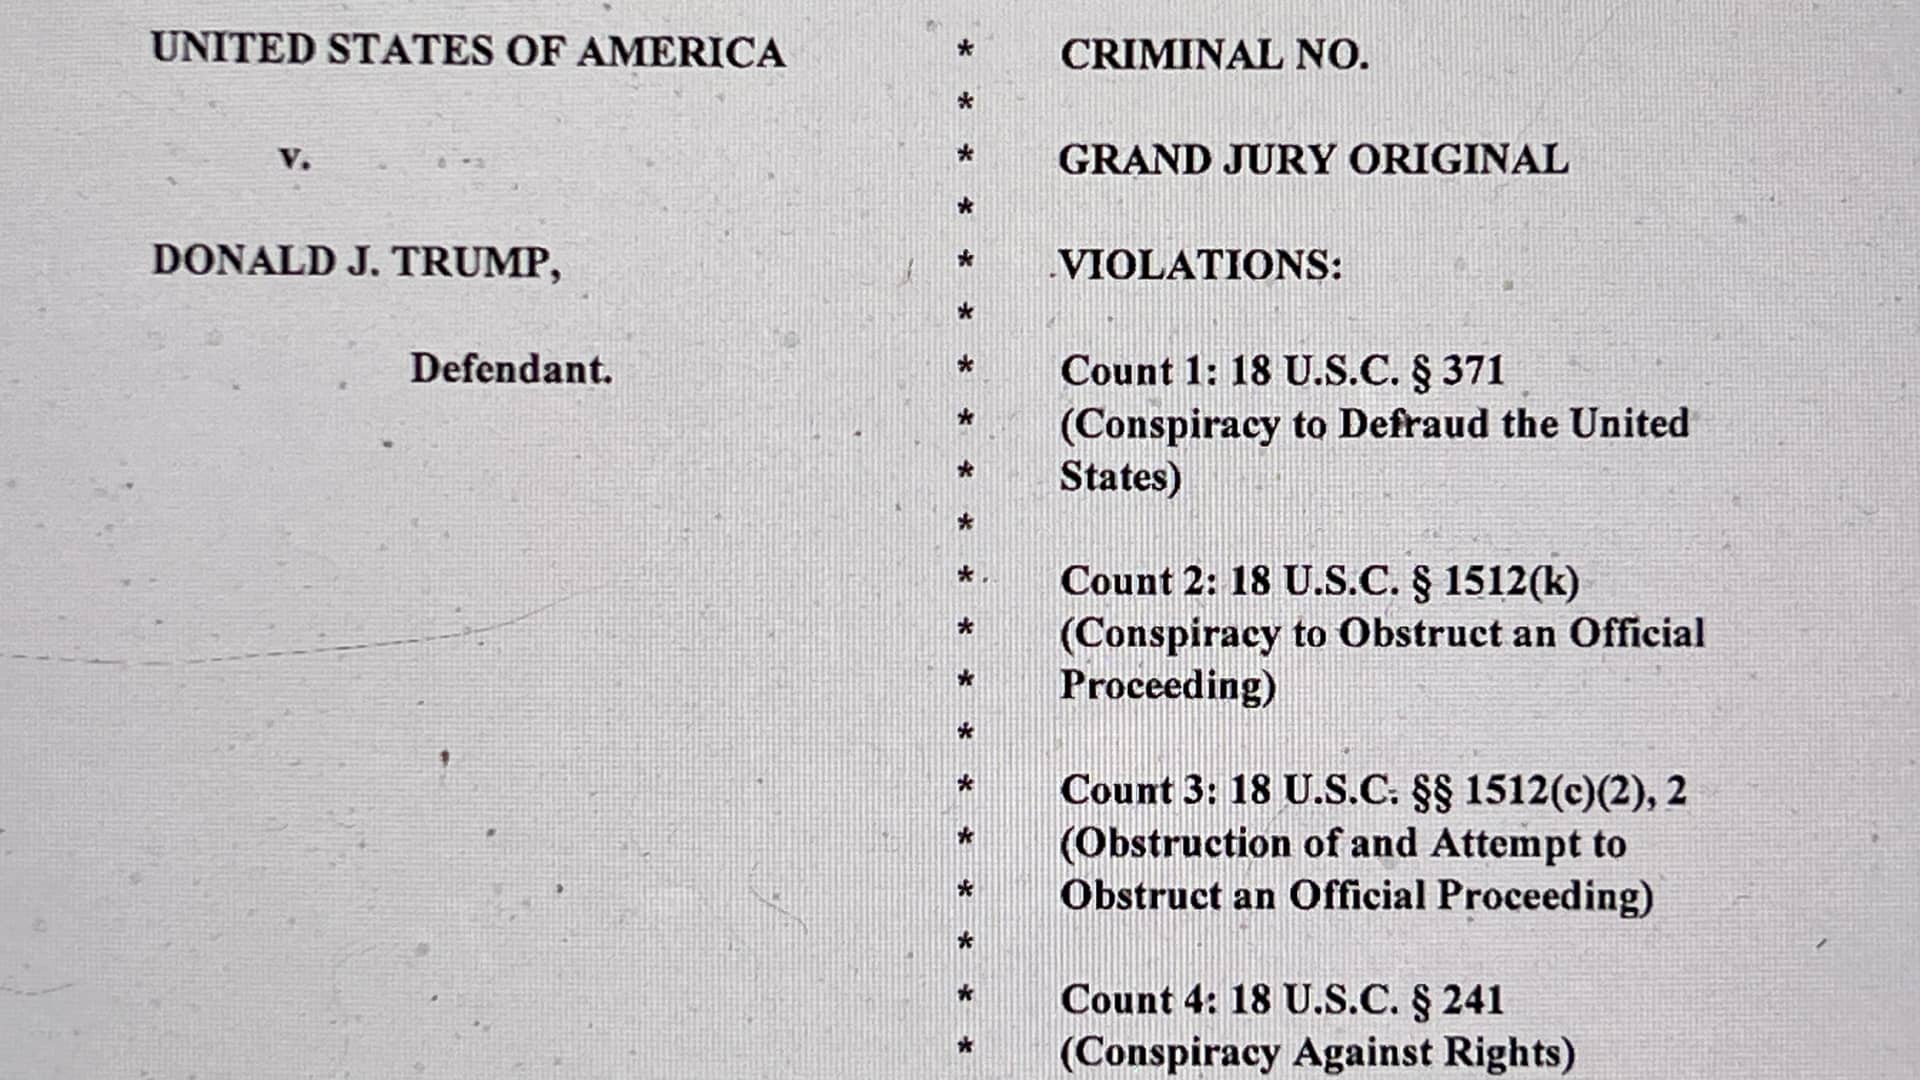 The opening page of an indictment against former U.S. President Donald Trump is seen after he was hit with criminal charges for a third time in four months - this time arising from efforts to overturn his 2020 U.S. election defeat, in a photo illustration August 1, 2023. 